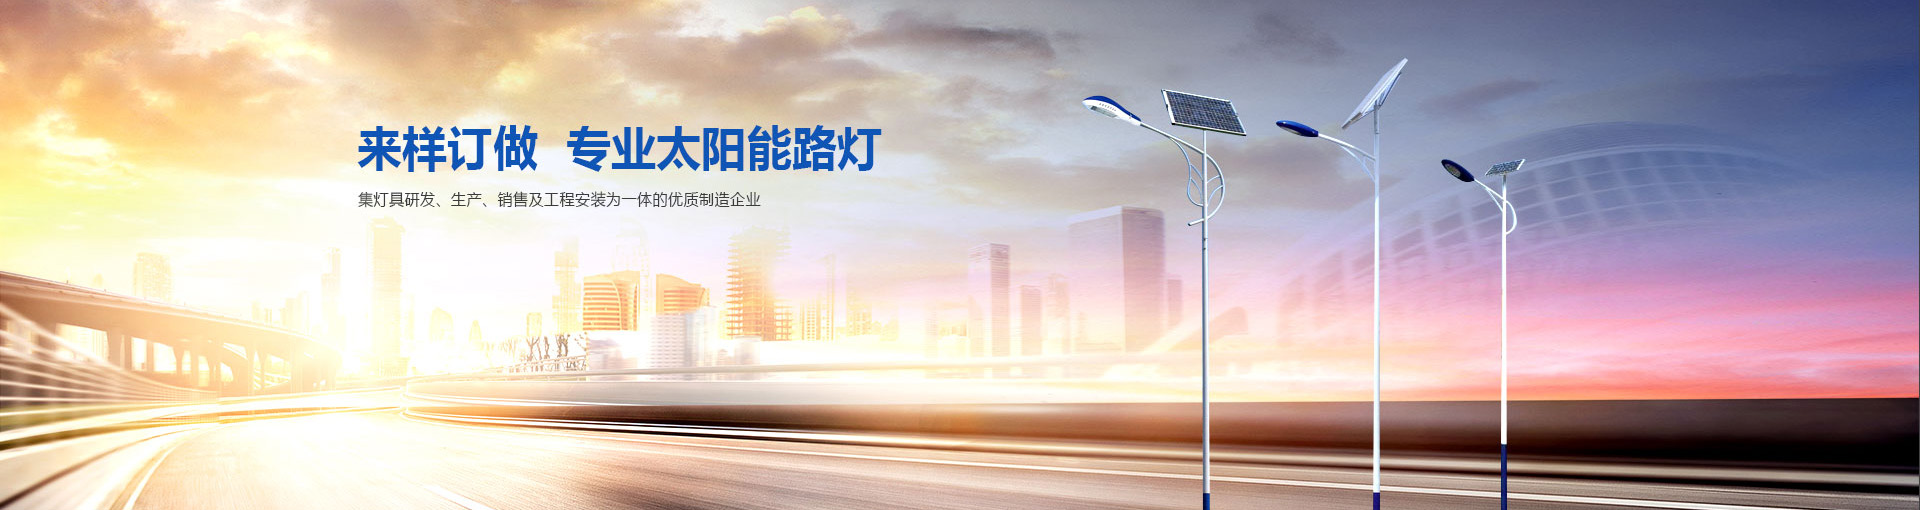 Products-Solar integrated street light-pude-hfh